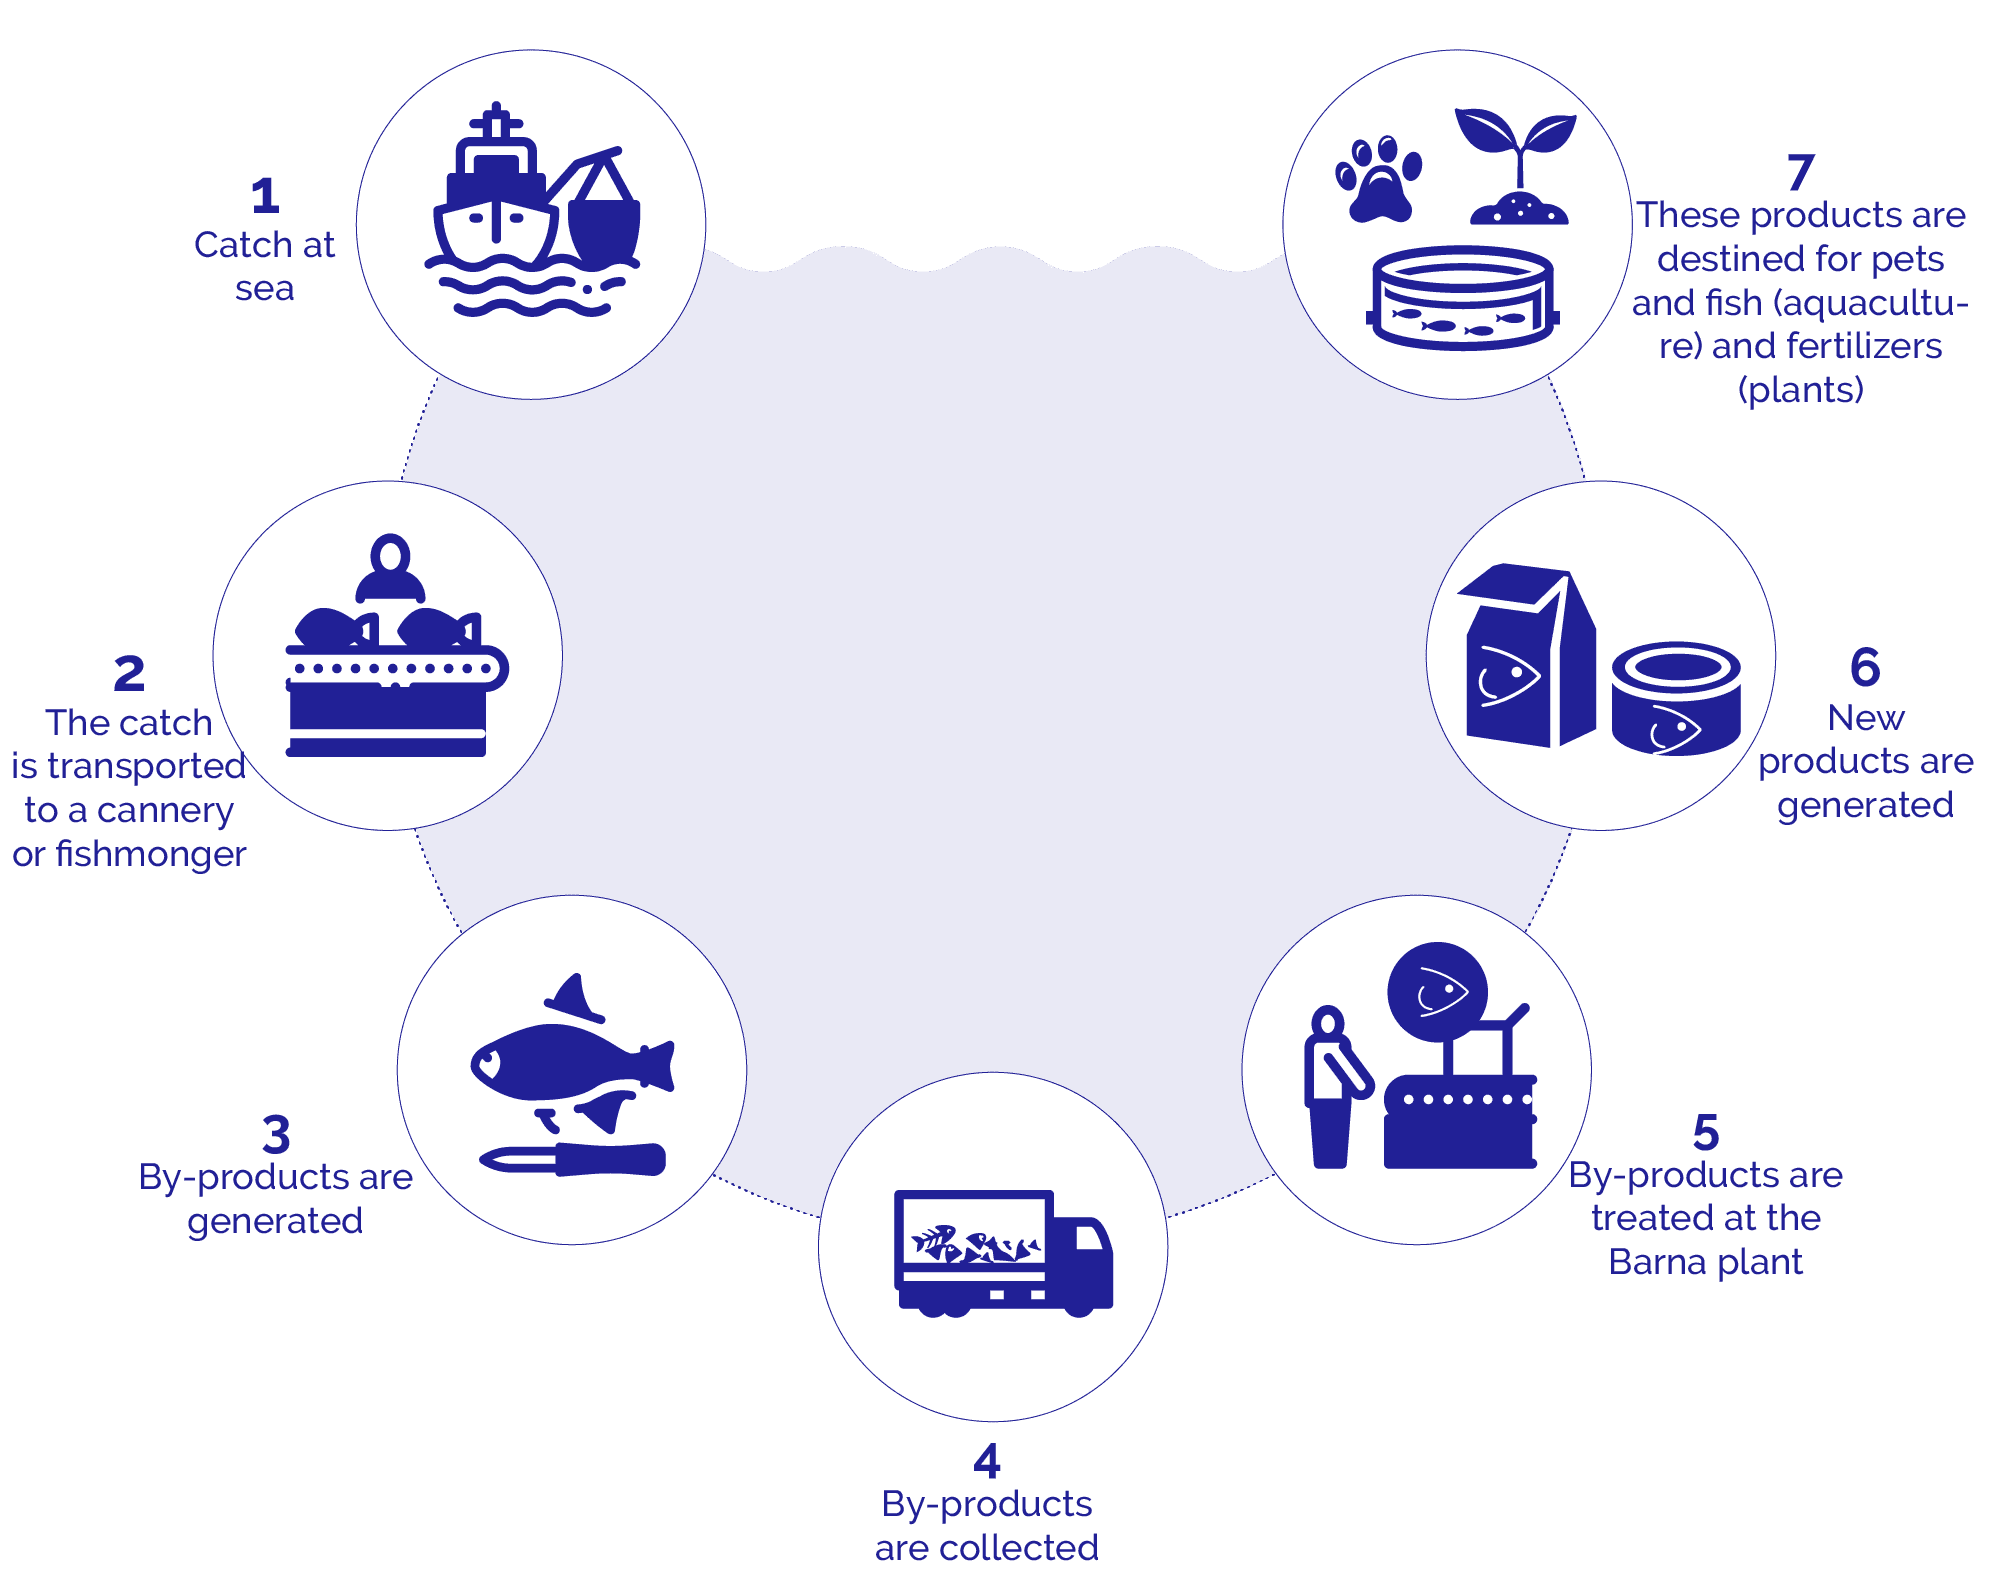 Catch at sea - The catch is transported to a cannery or fishmonger - By-products are generated - By-products are collected - By-products are treated at the Barna plant - New products are generated - These products are destined for pets and fish (aquaculture) and fertilizers (plants)